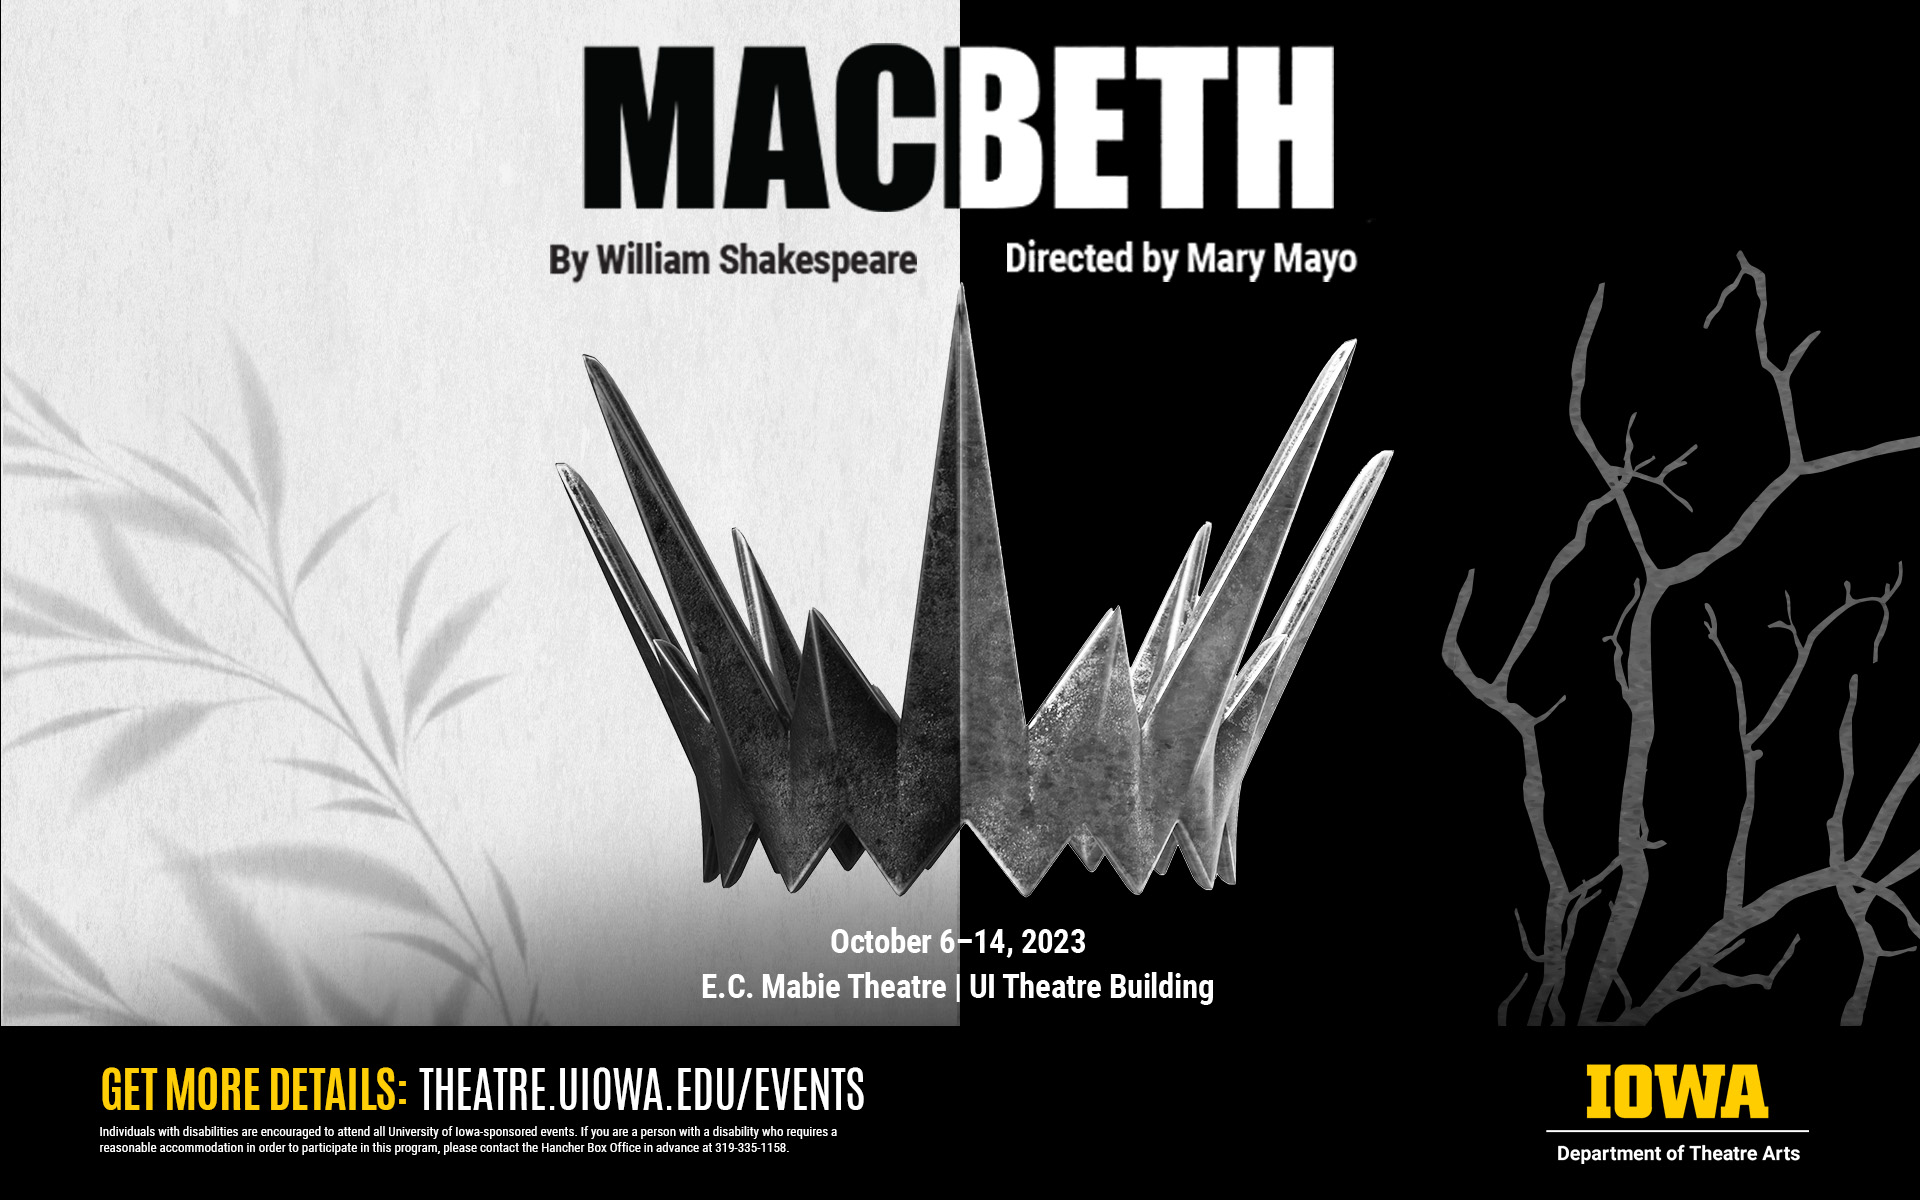 Macbeth by William Shakespeare directed by Mary Mayo October 6 to 14, 2023